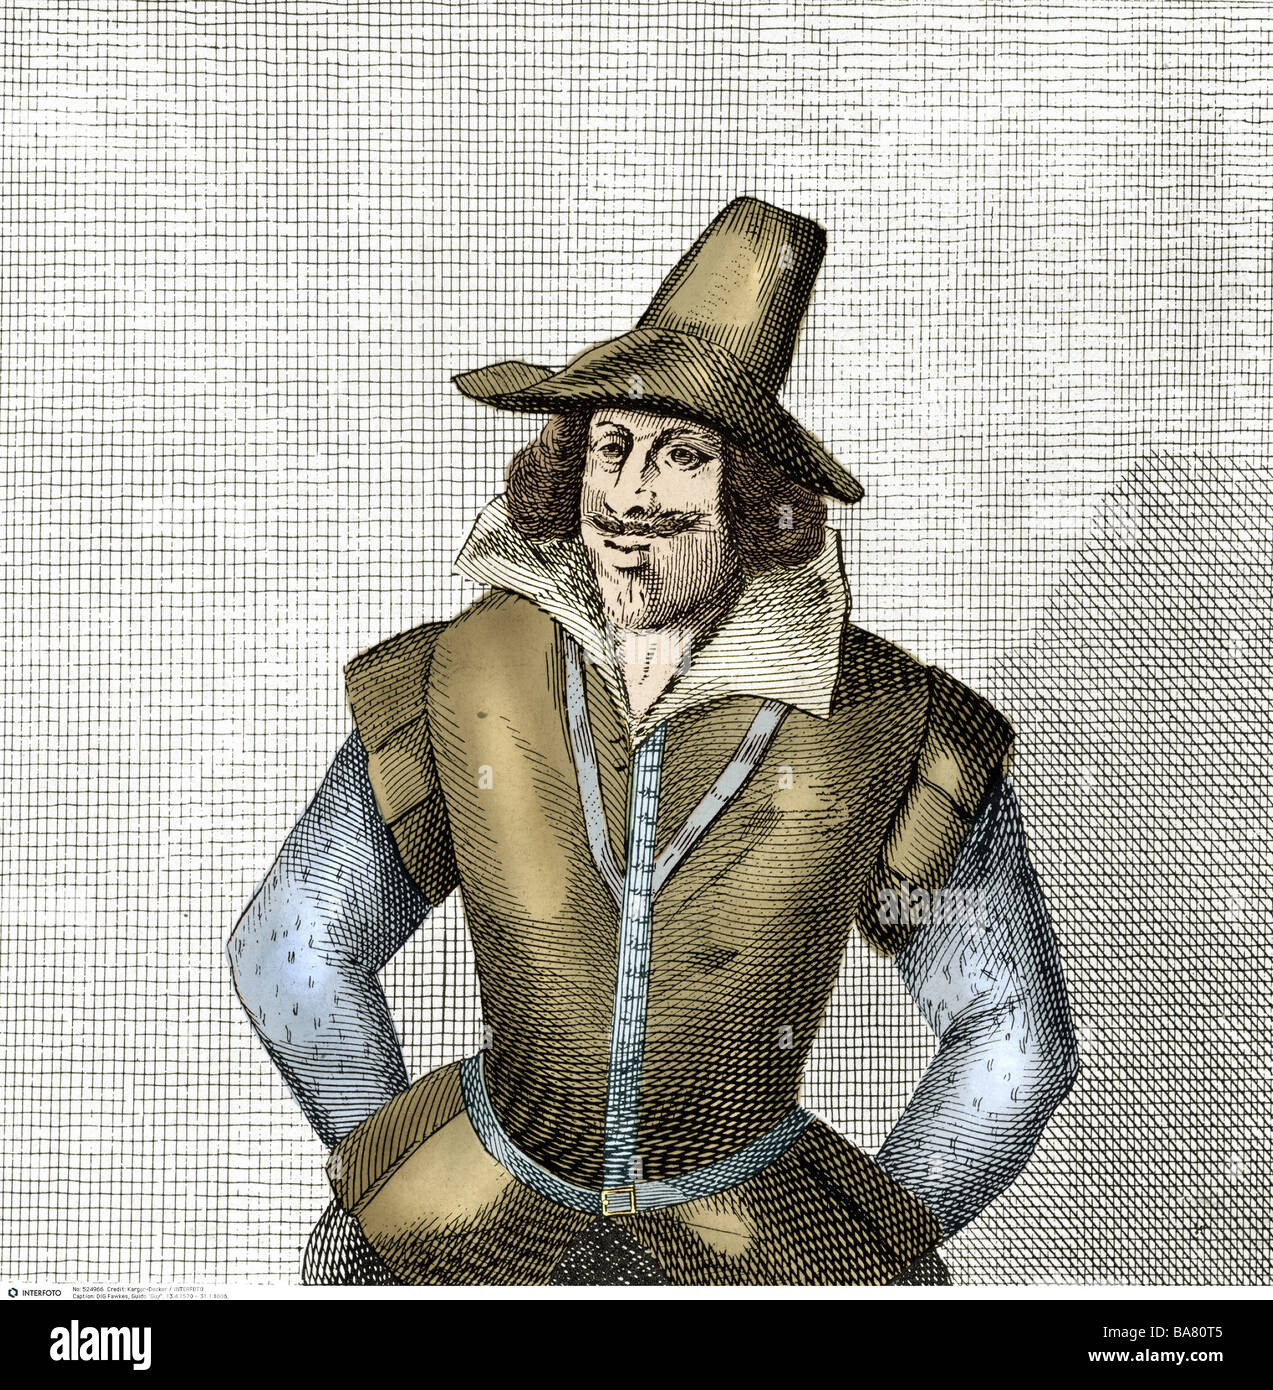 Fawkes, Guido 'Guy', 13.4.1570 - 31.1.1606, English assassin, involved in the 'Gunpowder Plot' in London, 5.11.1605, contemporaneous engraving, later coloured, Stock Photo